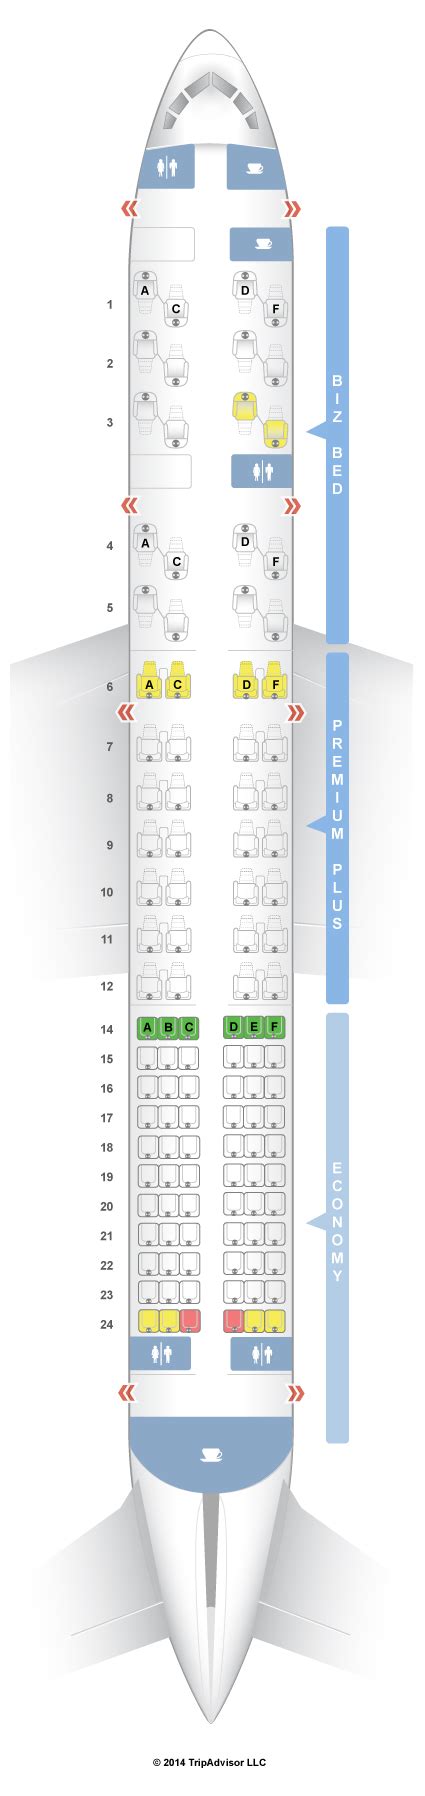 Boeing Jet Seating Chart Hot Sex Picture